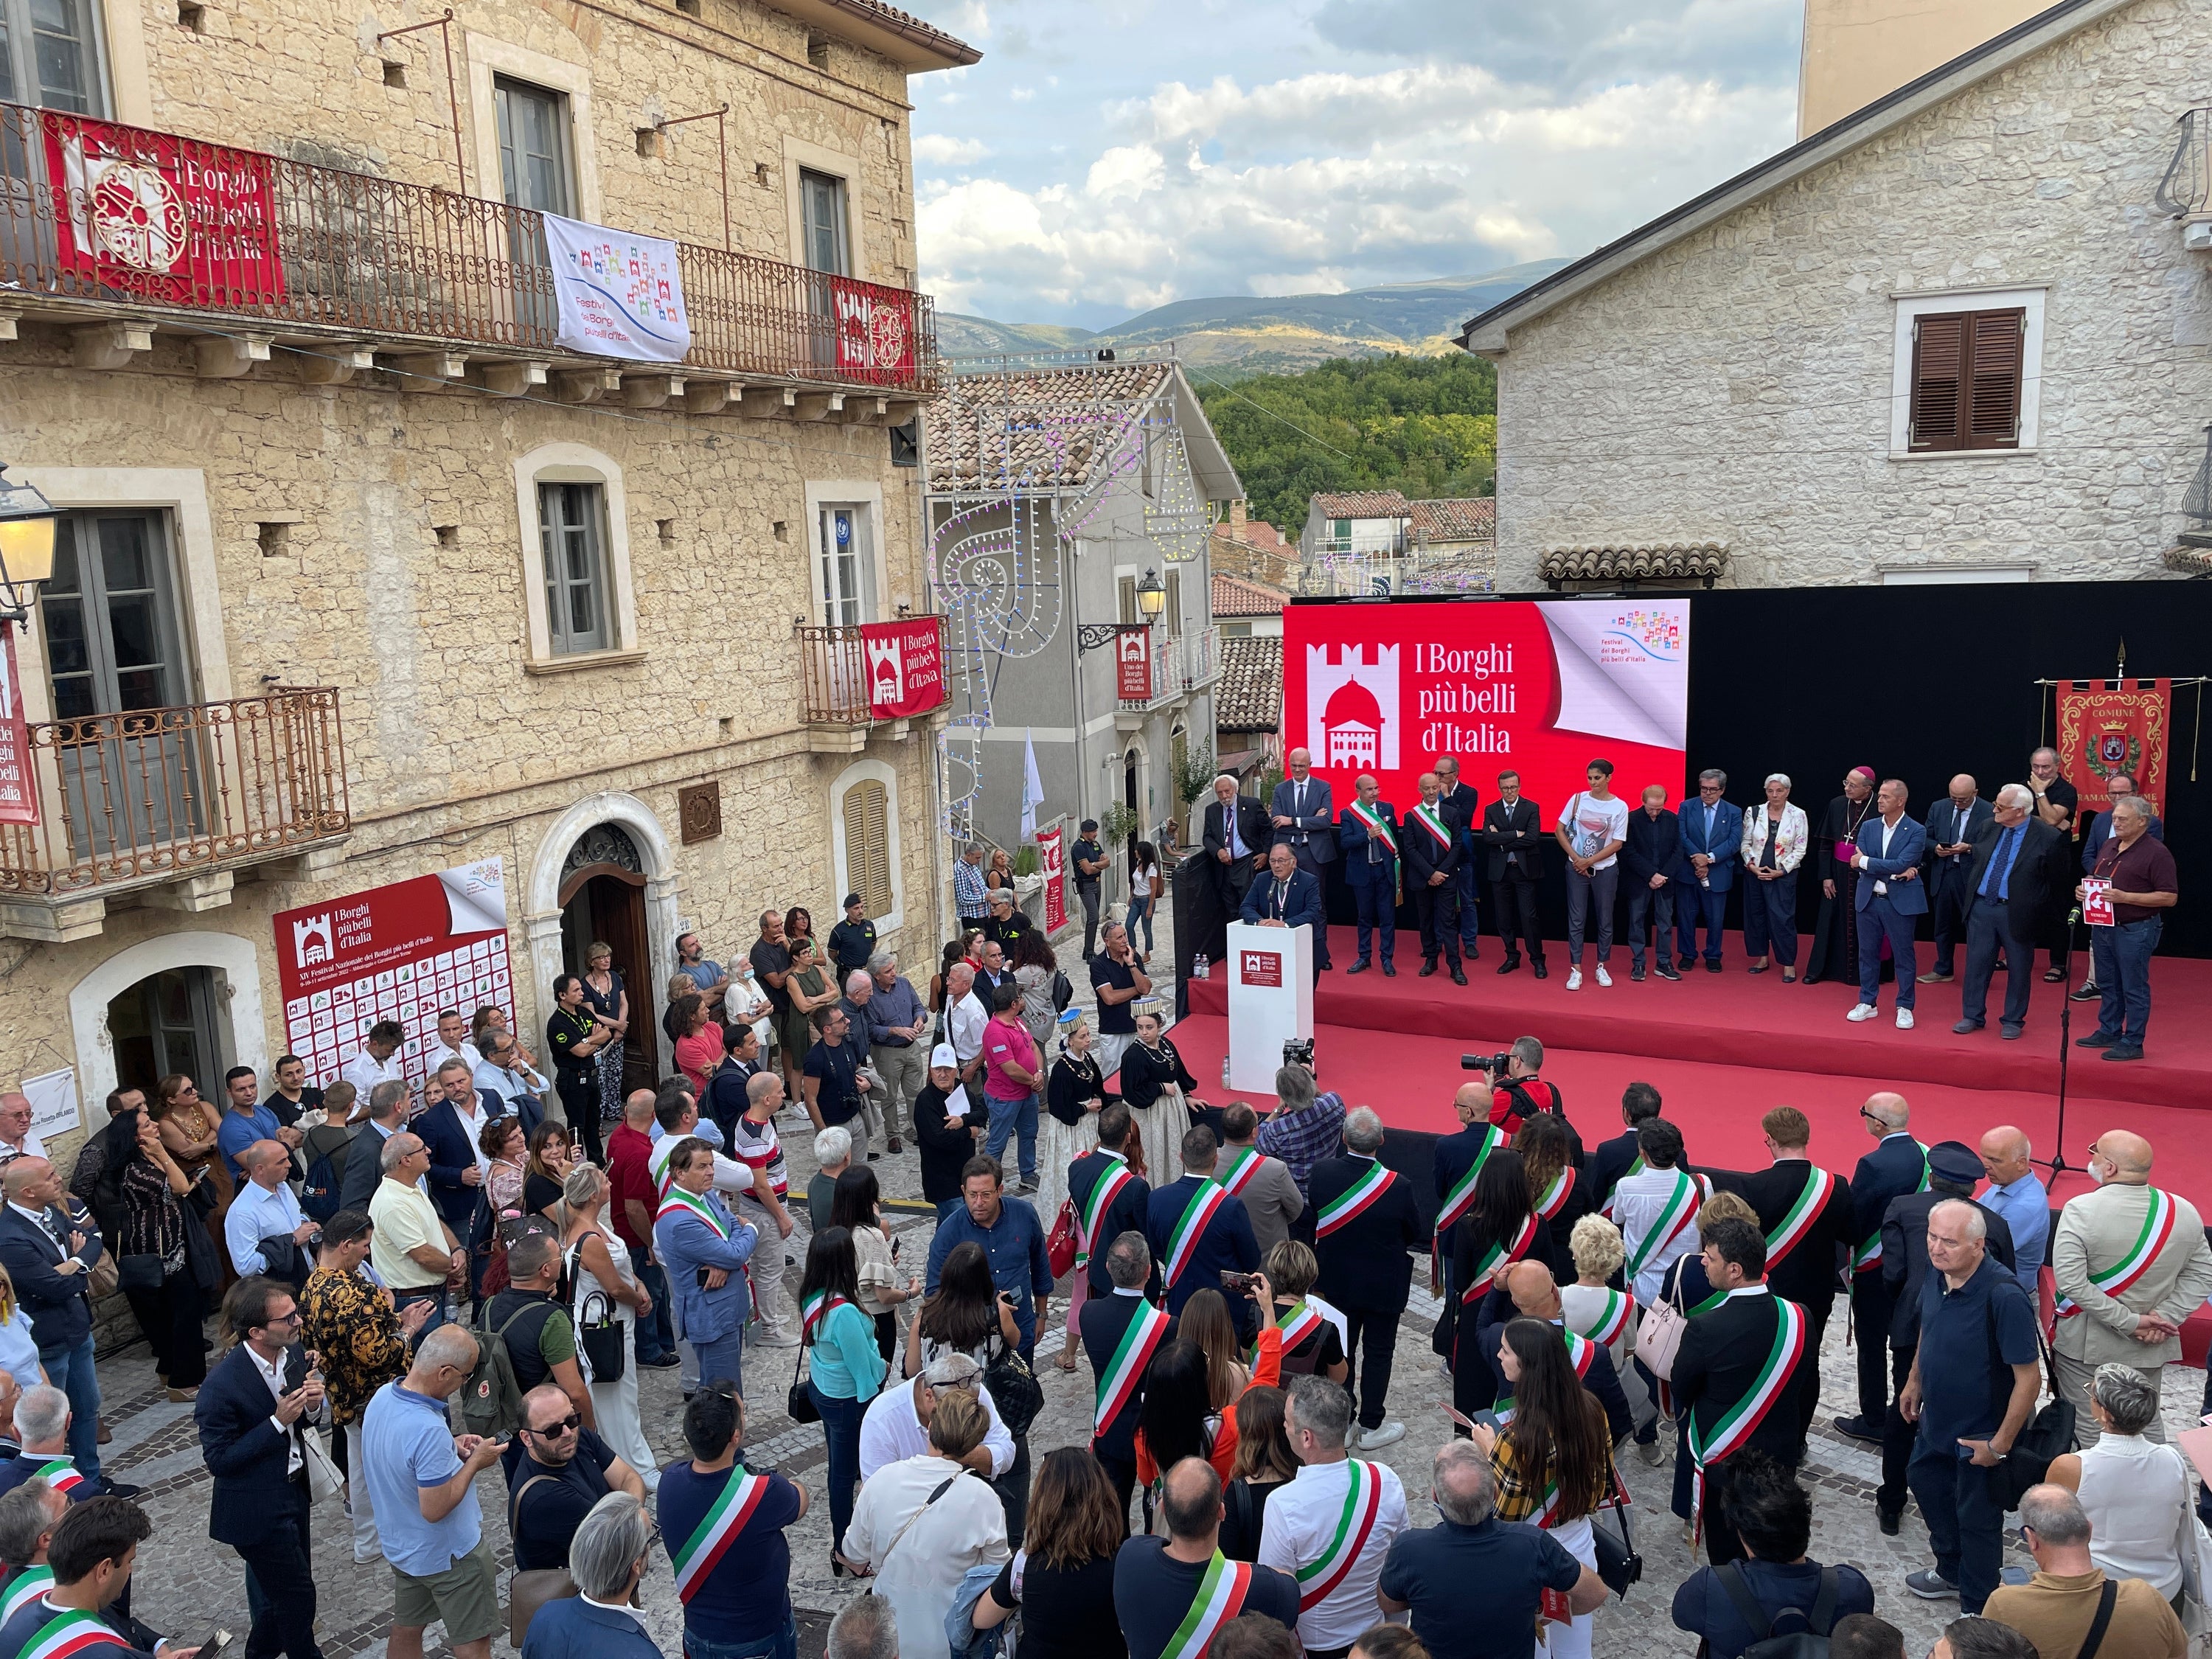 Mayors representing more than 100 villages designated most beautiful gathered in Abbateggio